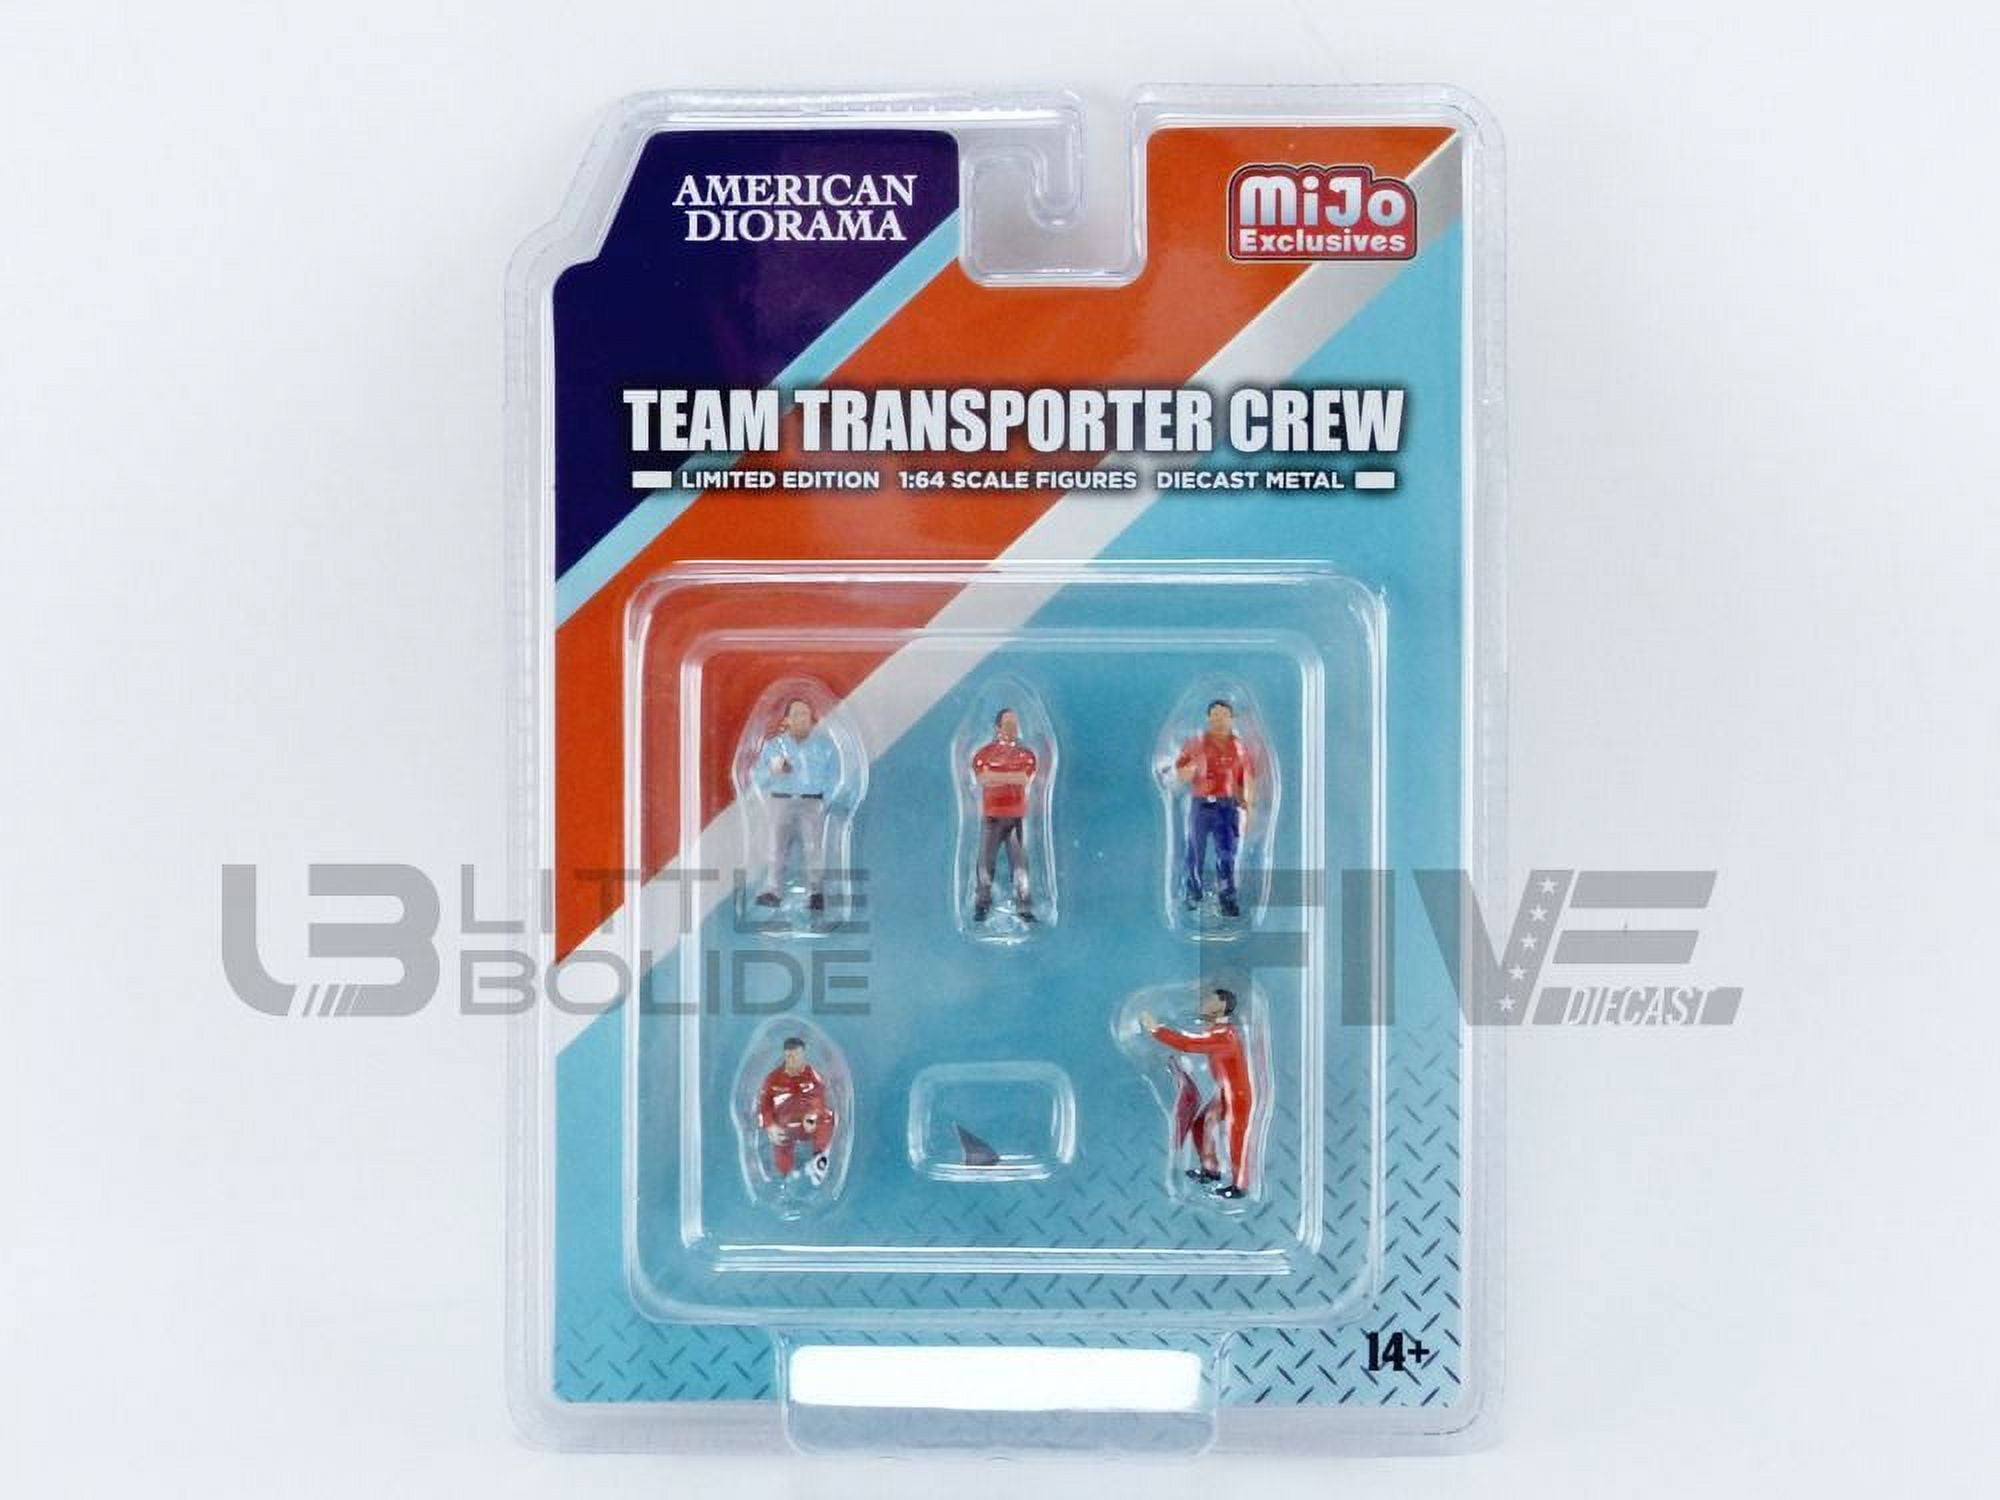 Picture of American Diorama 76463 Team Transporter Crew Scale Diecast 1 by 64 Scale Models Figures Set - Set of 6